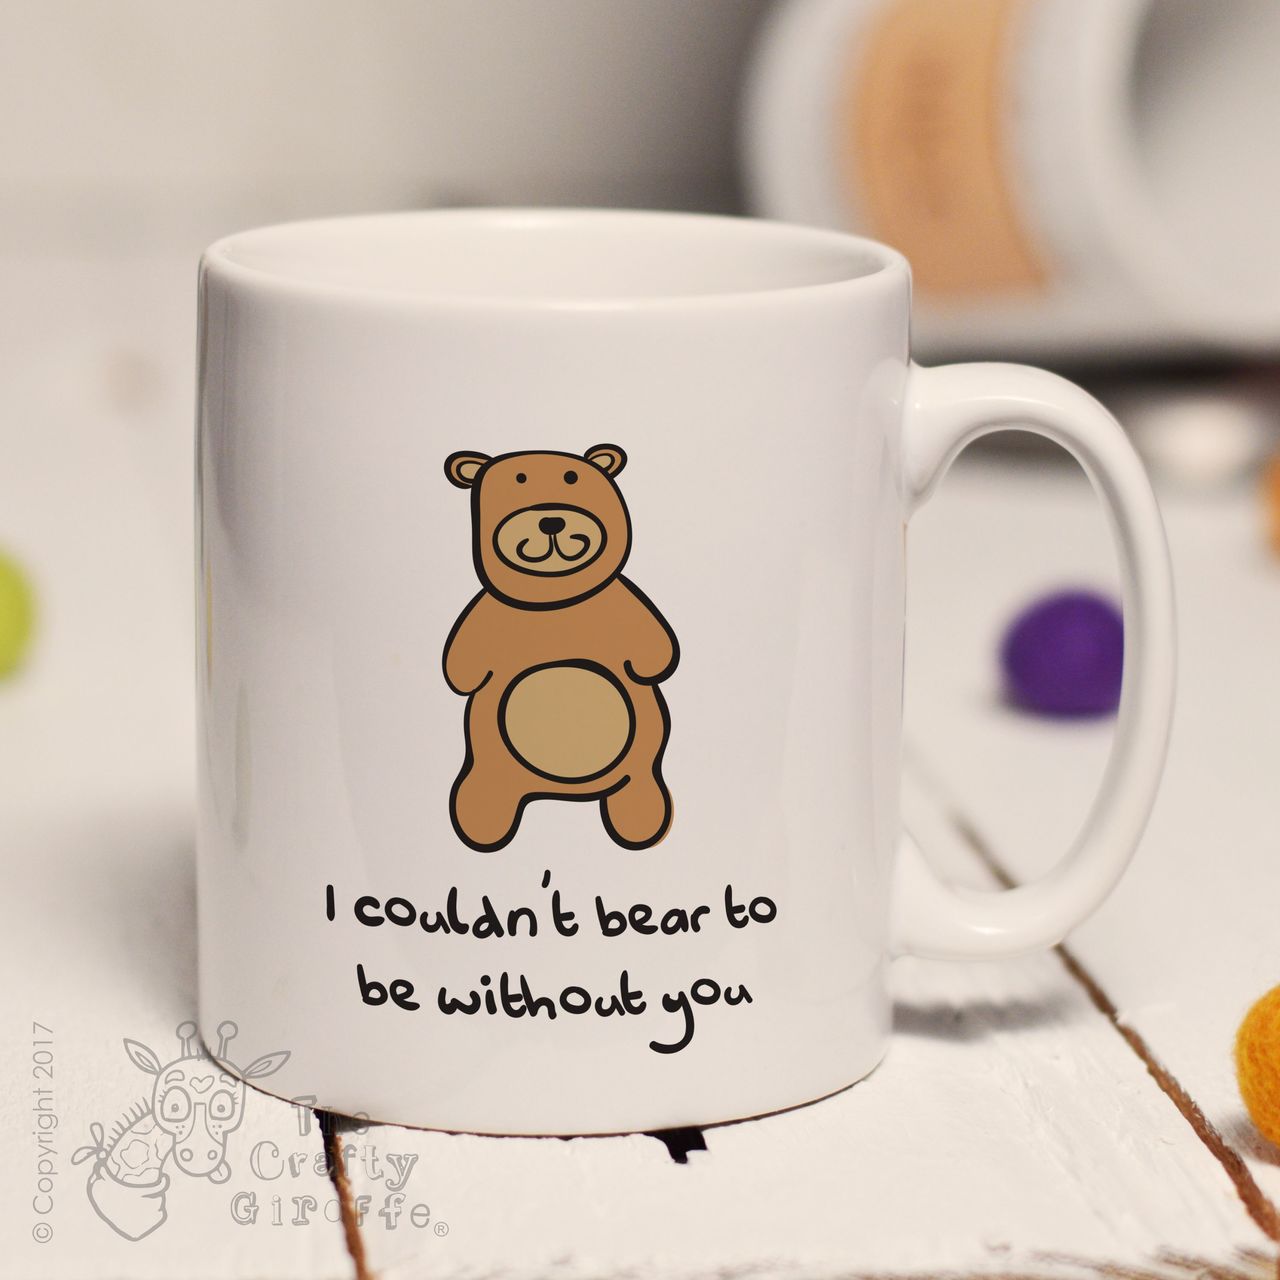 I couldn’t bear to be without you mug